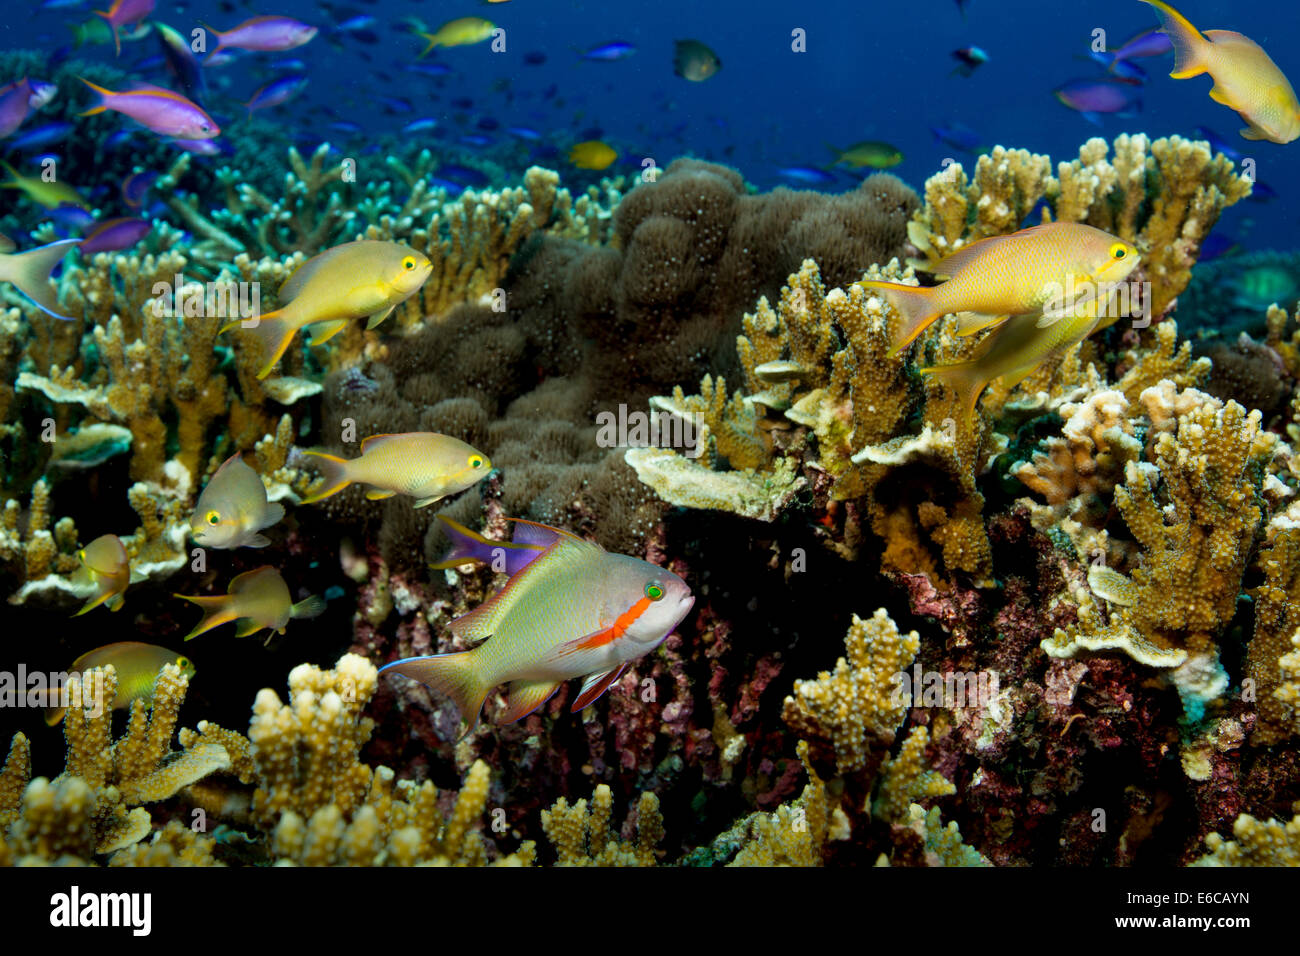 Male Threadfin anthias with a harem of female Threadfin anthias, seen flitting above a coral reef. Stock Photo